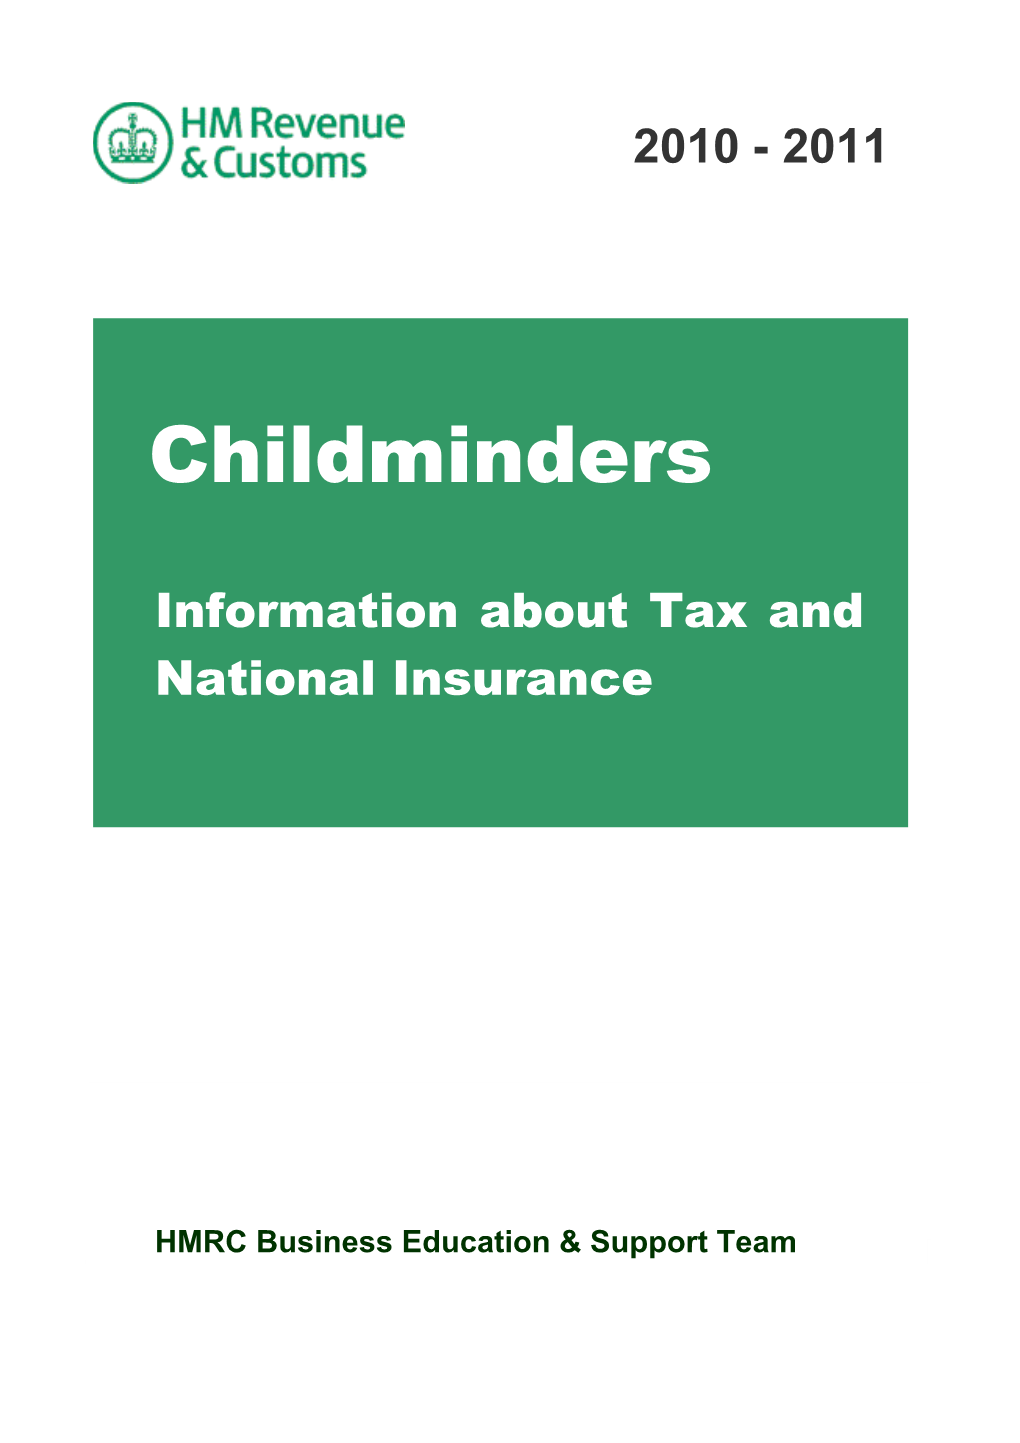 Information About Tax and National Insurance